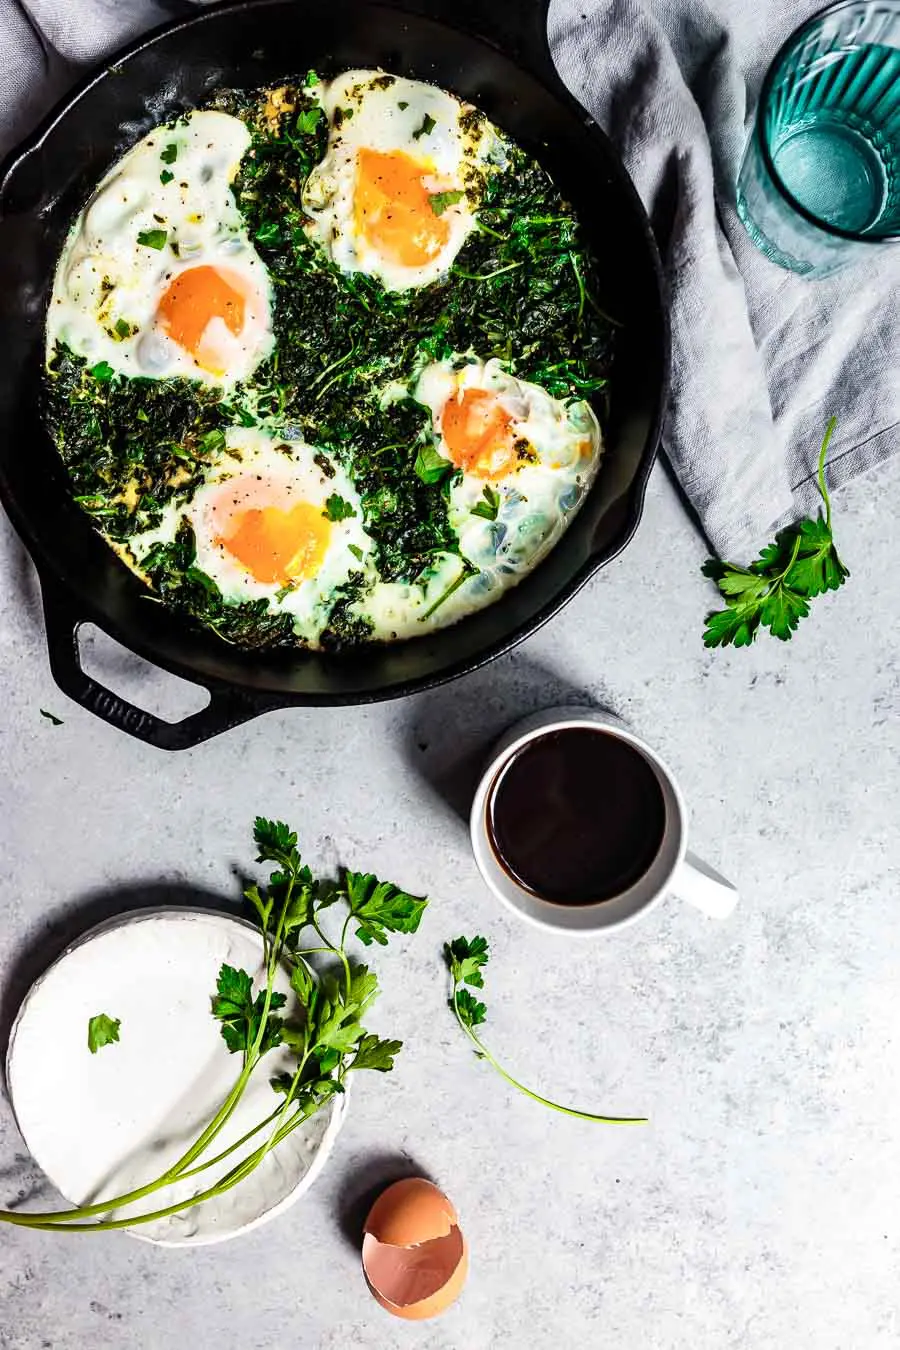 View from above of green breakfast shakshuka in a black skillet. Inside the skillet all the green veggies have wilted and the eggs can be seen very vibrant. The skillet is on a white table top next to a blue glass, a cup of coffee is also on the table, next to an empty egg shell and some fresh herbs.